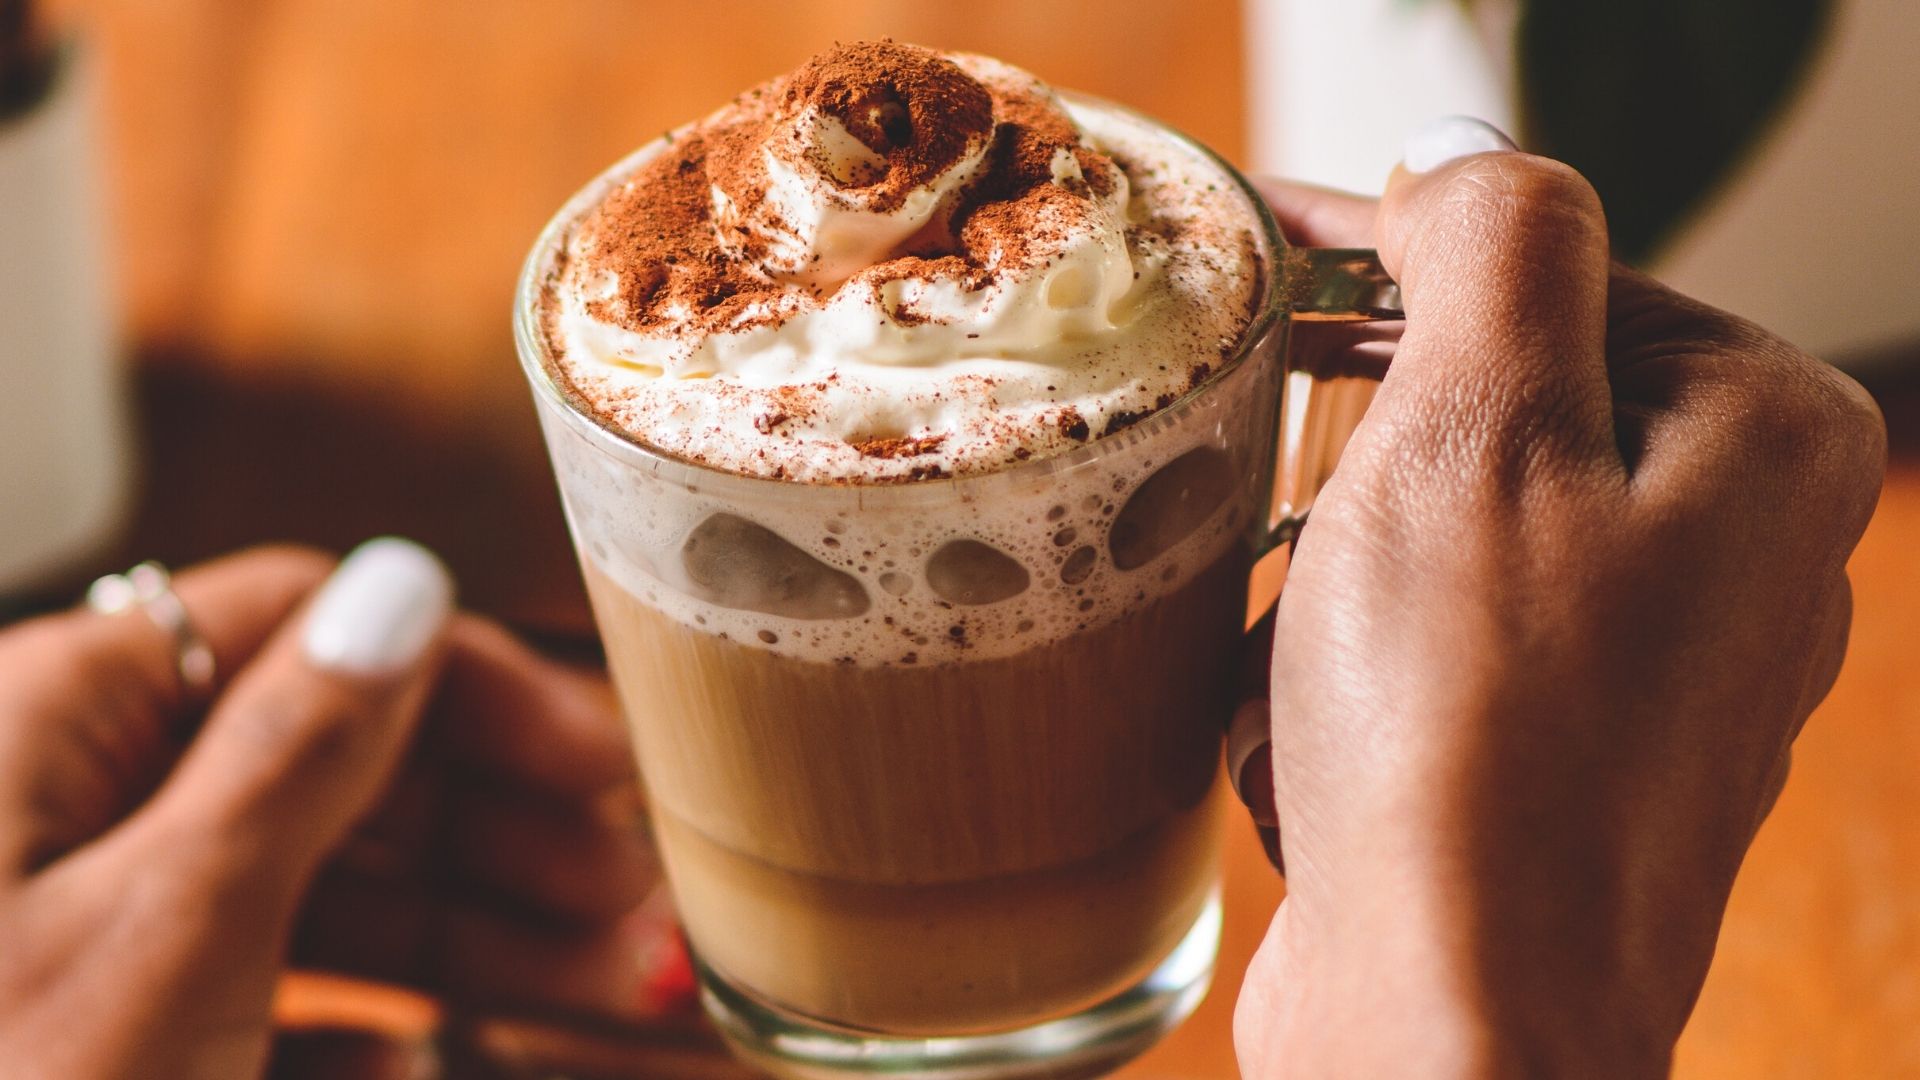 Warm-Up With These Cannabis-Infused Hot Chocolate Recipes